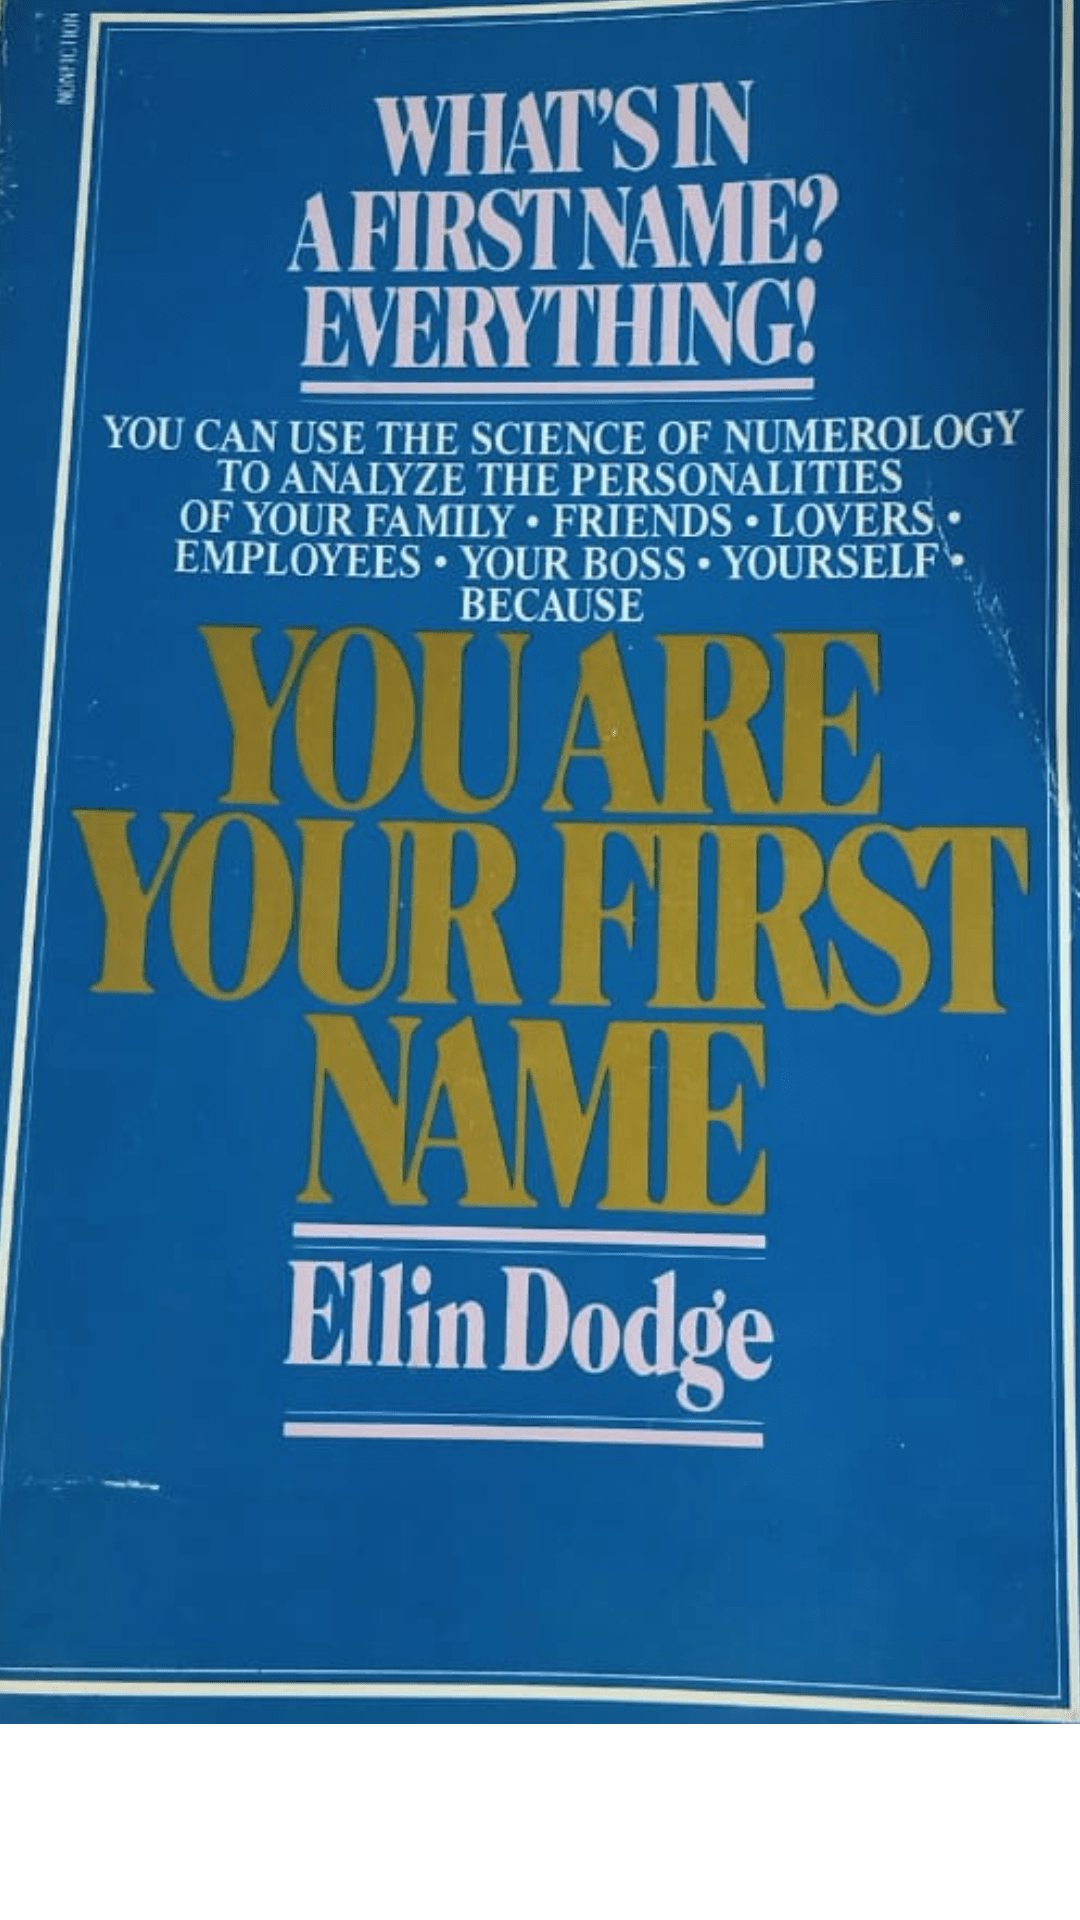 You are your first name